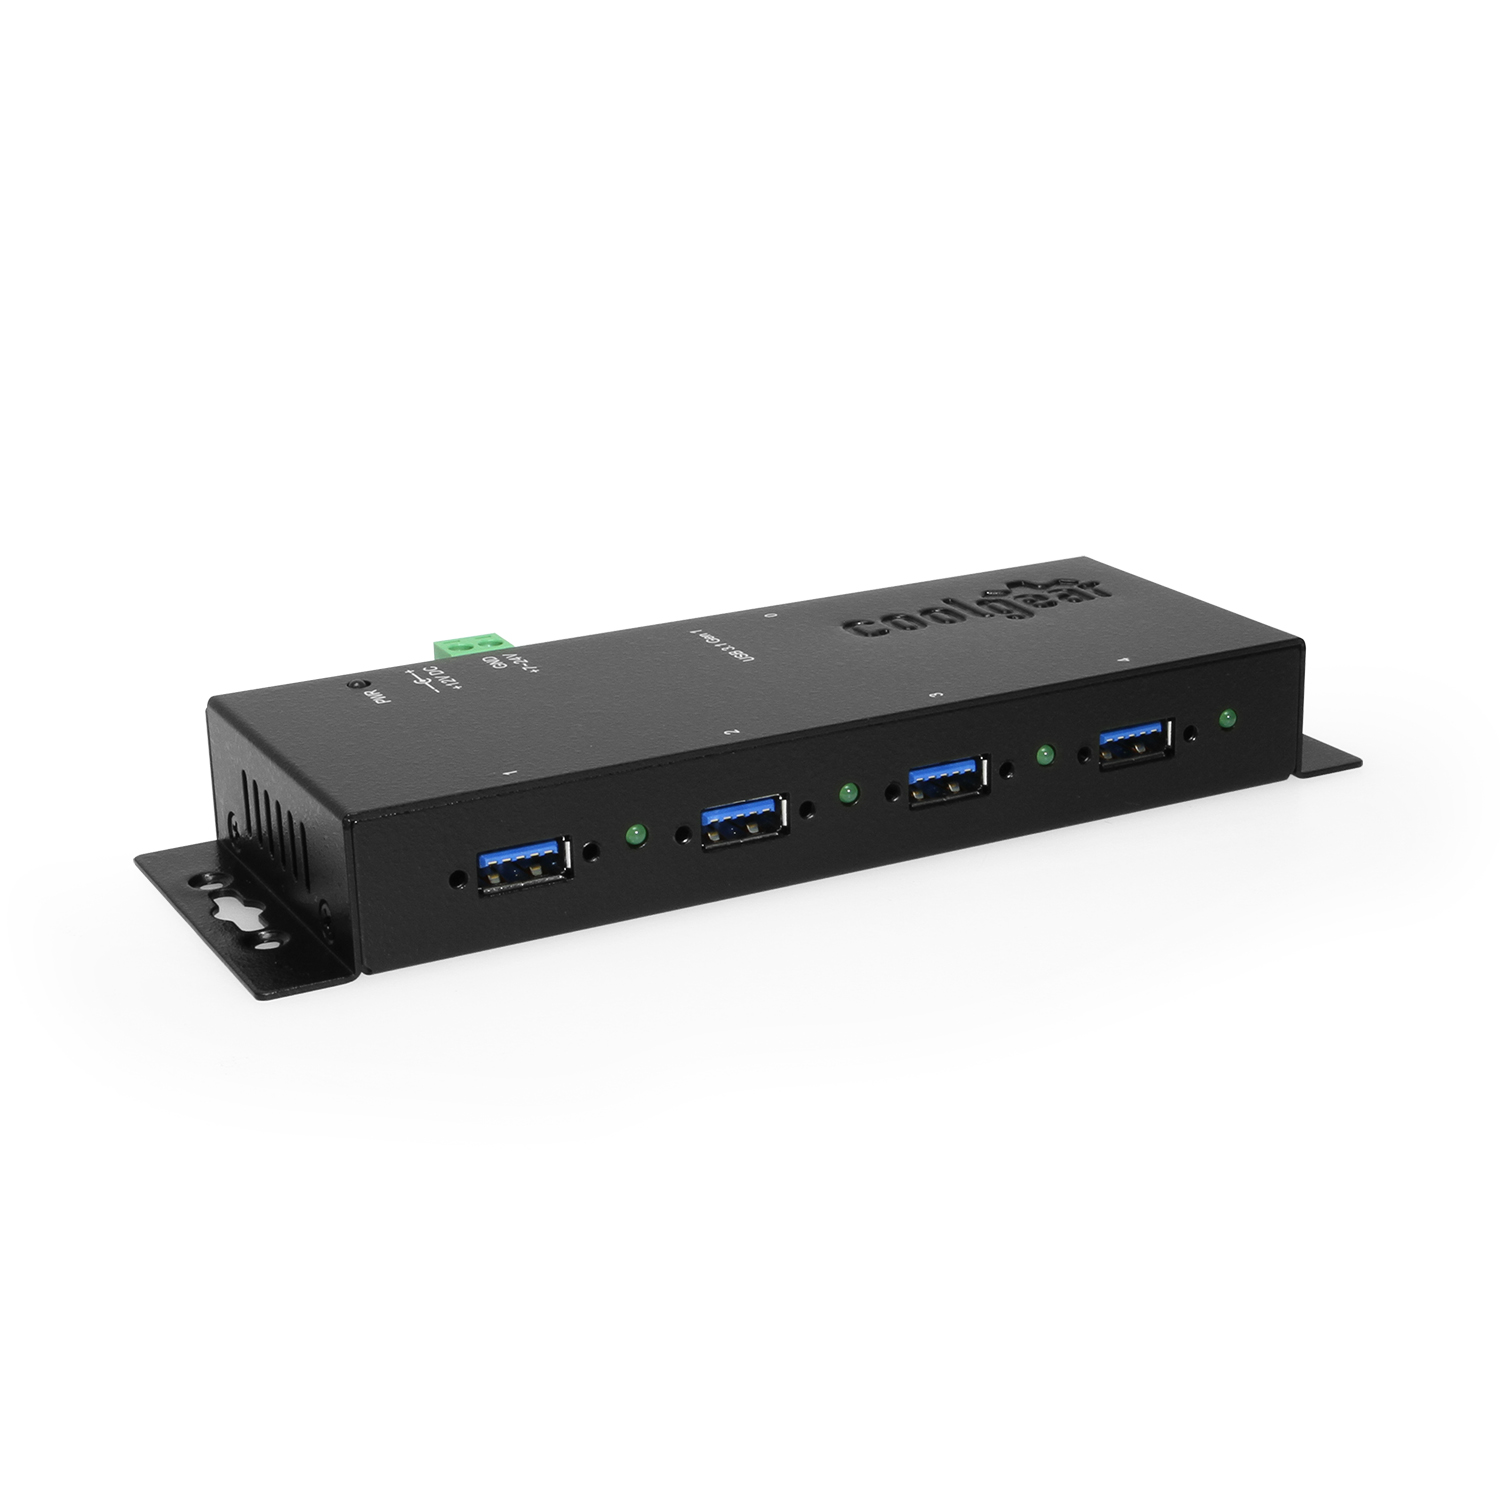 StarTech.com 4 Port USB 3.0 Hub SuperSpeed 5Gbps with Fast Charge Portable  USB 3.1/USB 3.2 Gen 1 Type-A Laptop/Desktop Hub - USB Bus Power or Self  Powered for High Performance - Mini/Compact 